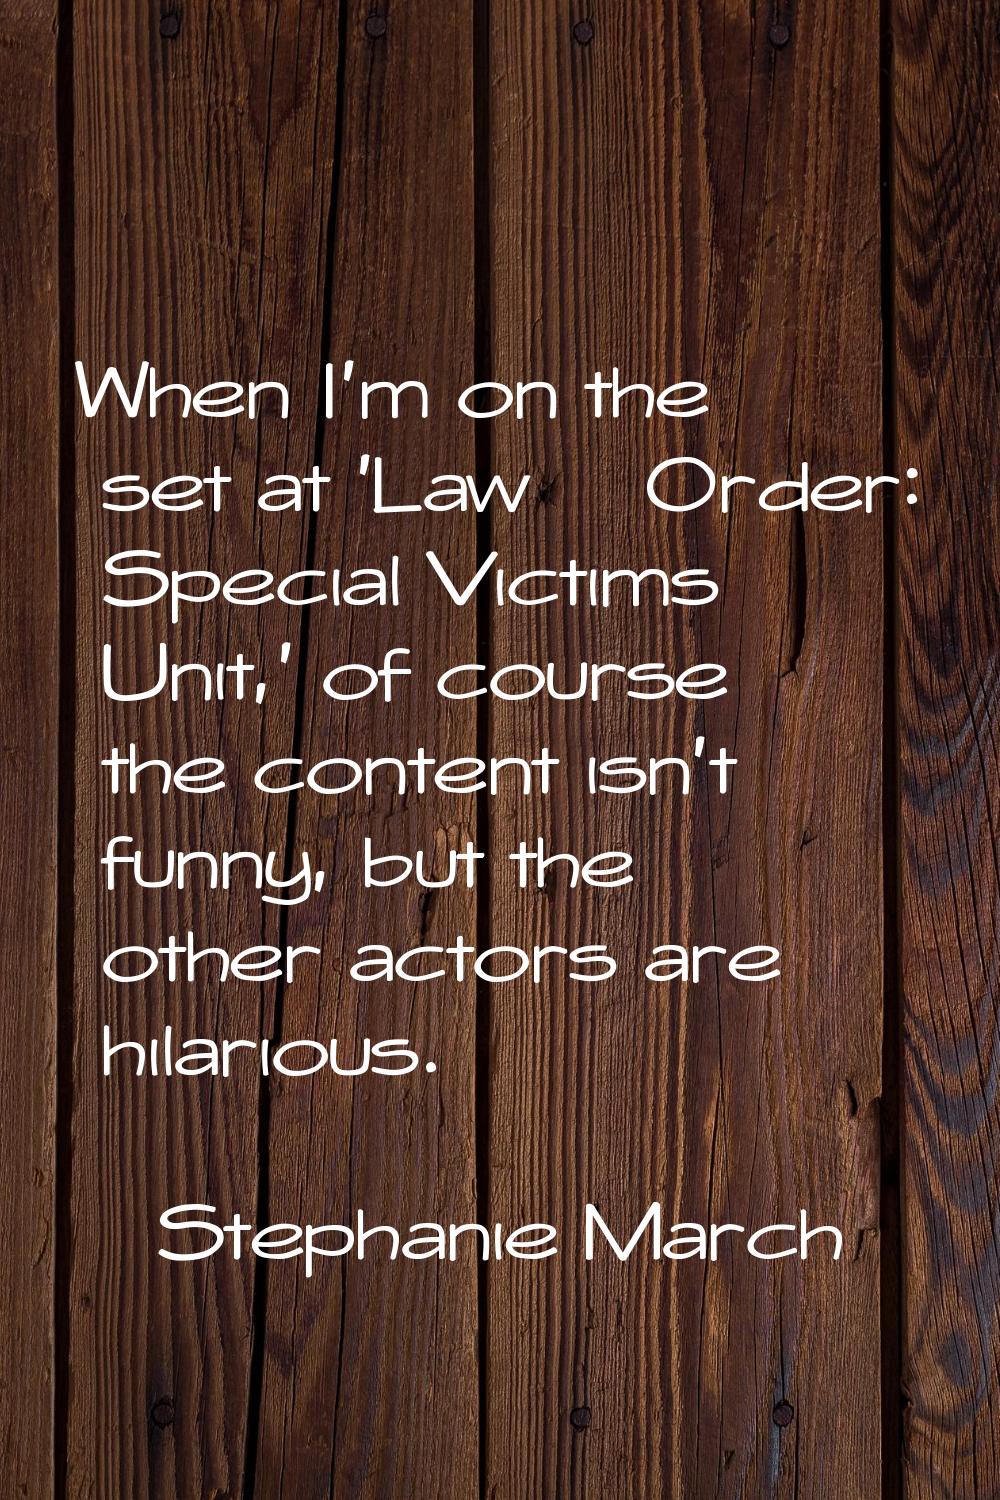 When I'm on the set at 'Law & Order: Special Victims Unit,' of course the content isn't funny, but 